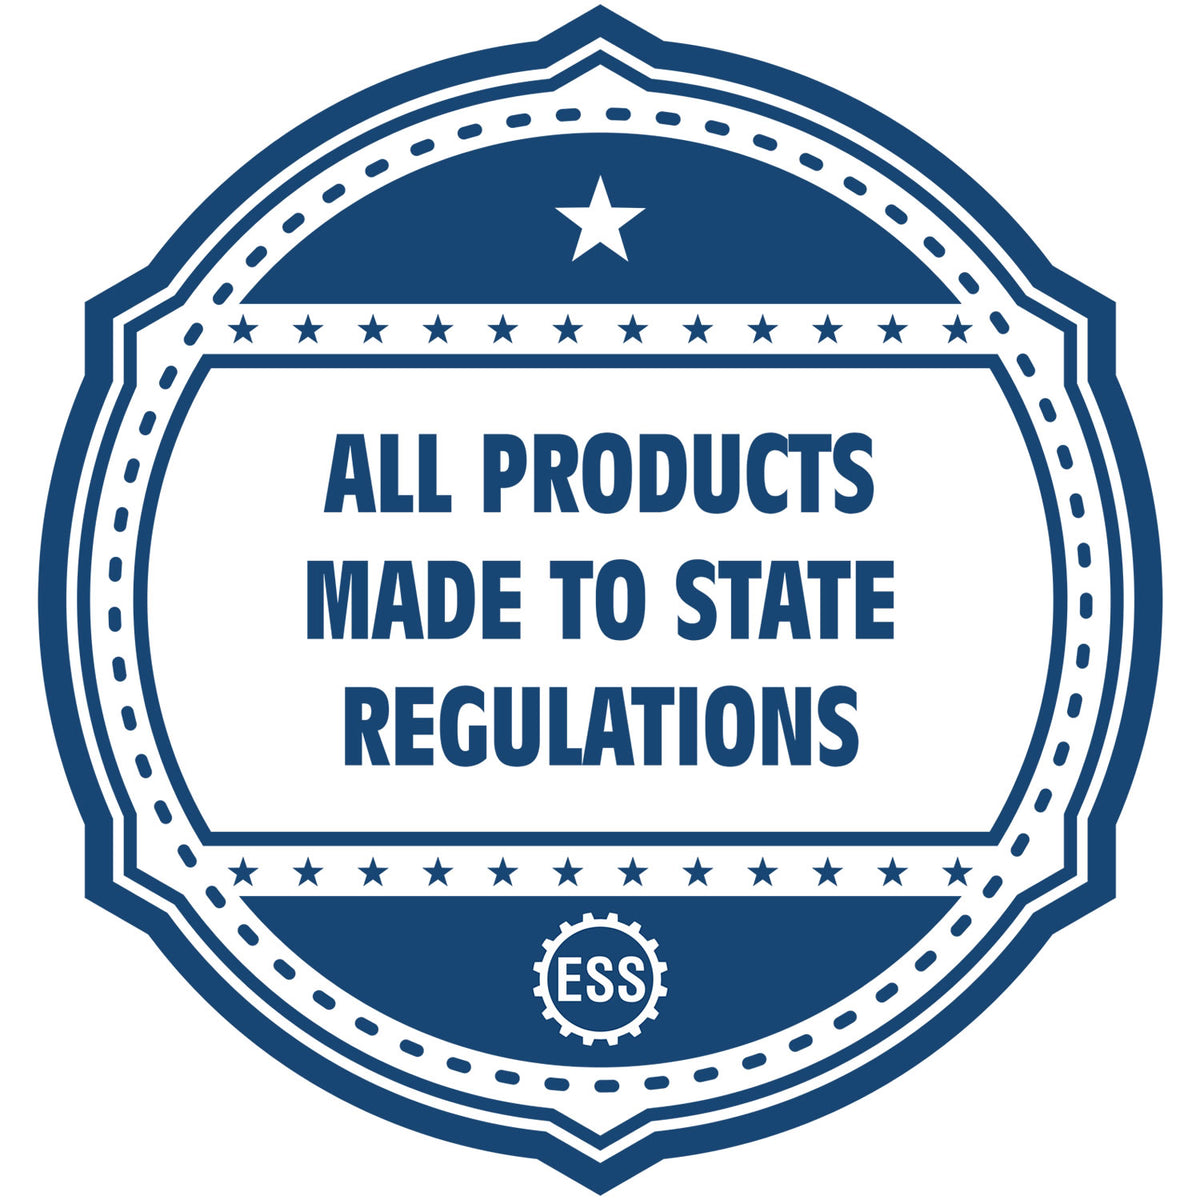 An icon or badge element for the Soft Pocket Maine Landscape Architect Embosser showing that this product is made in compliance with state regulations.